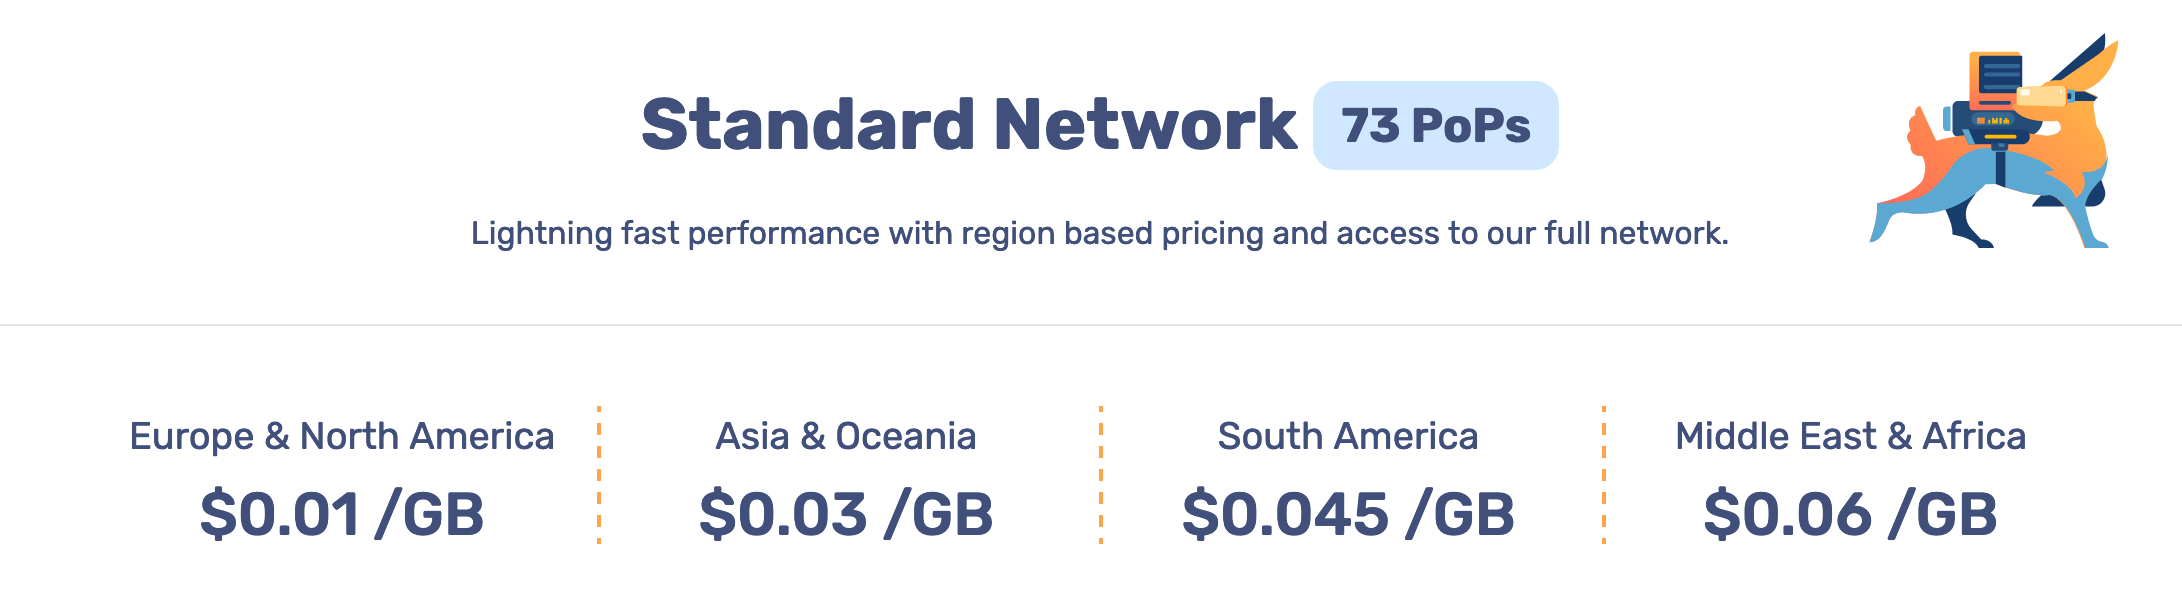 Network pricing